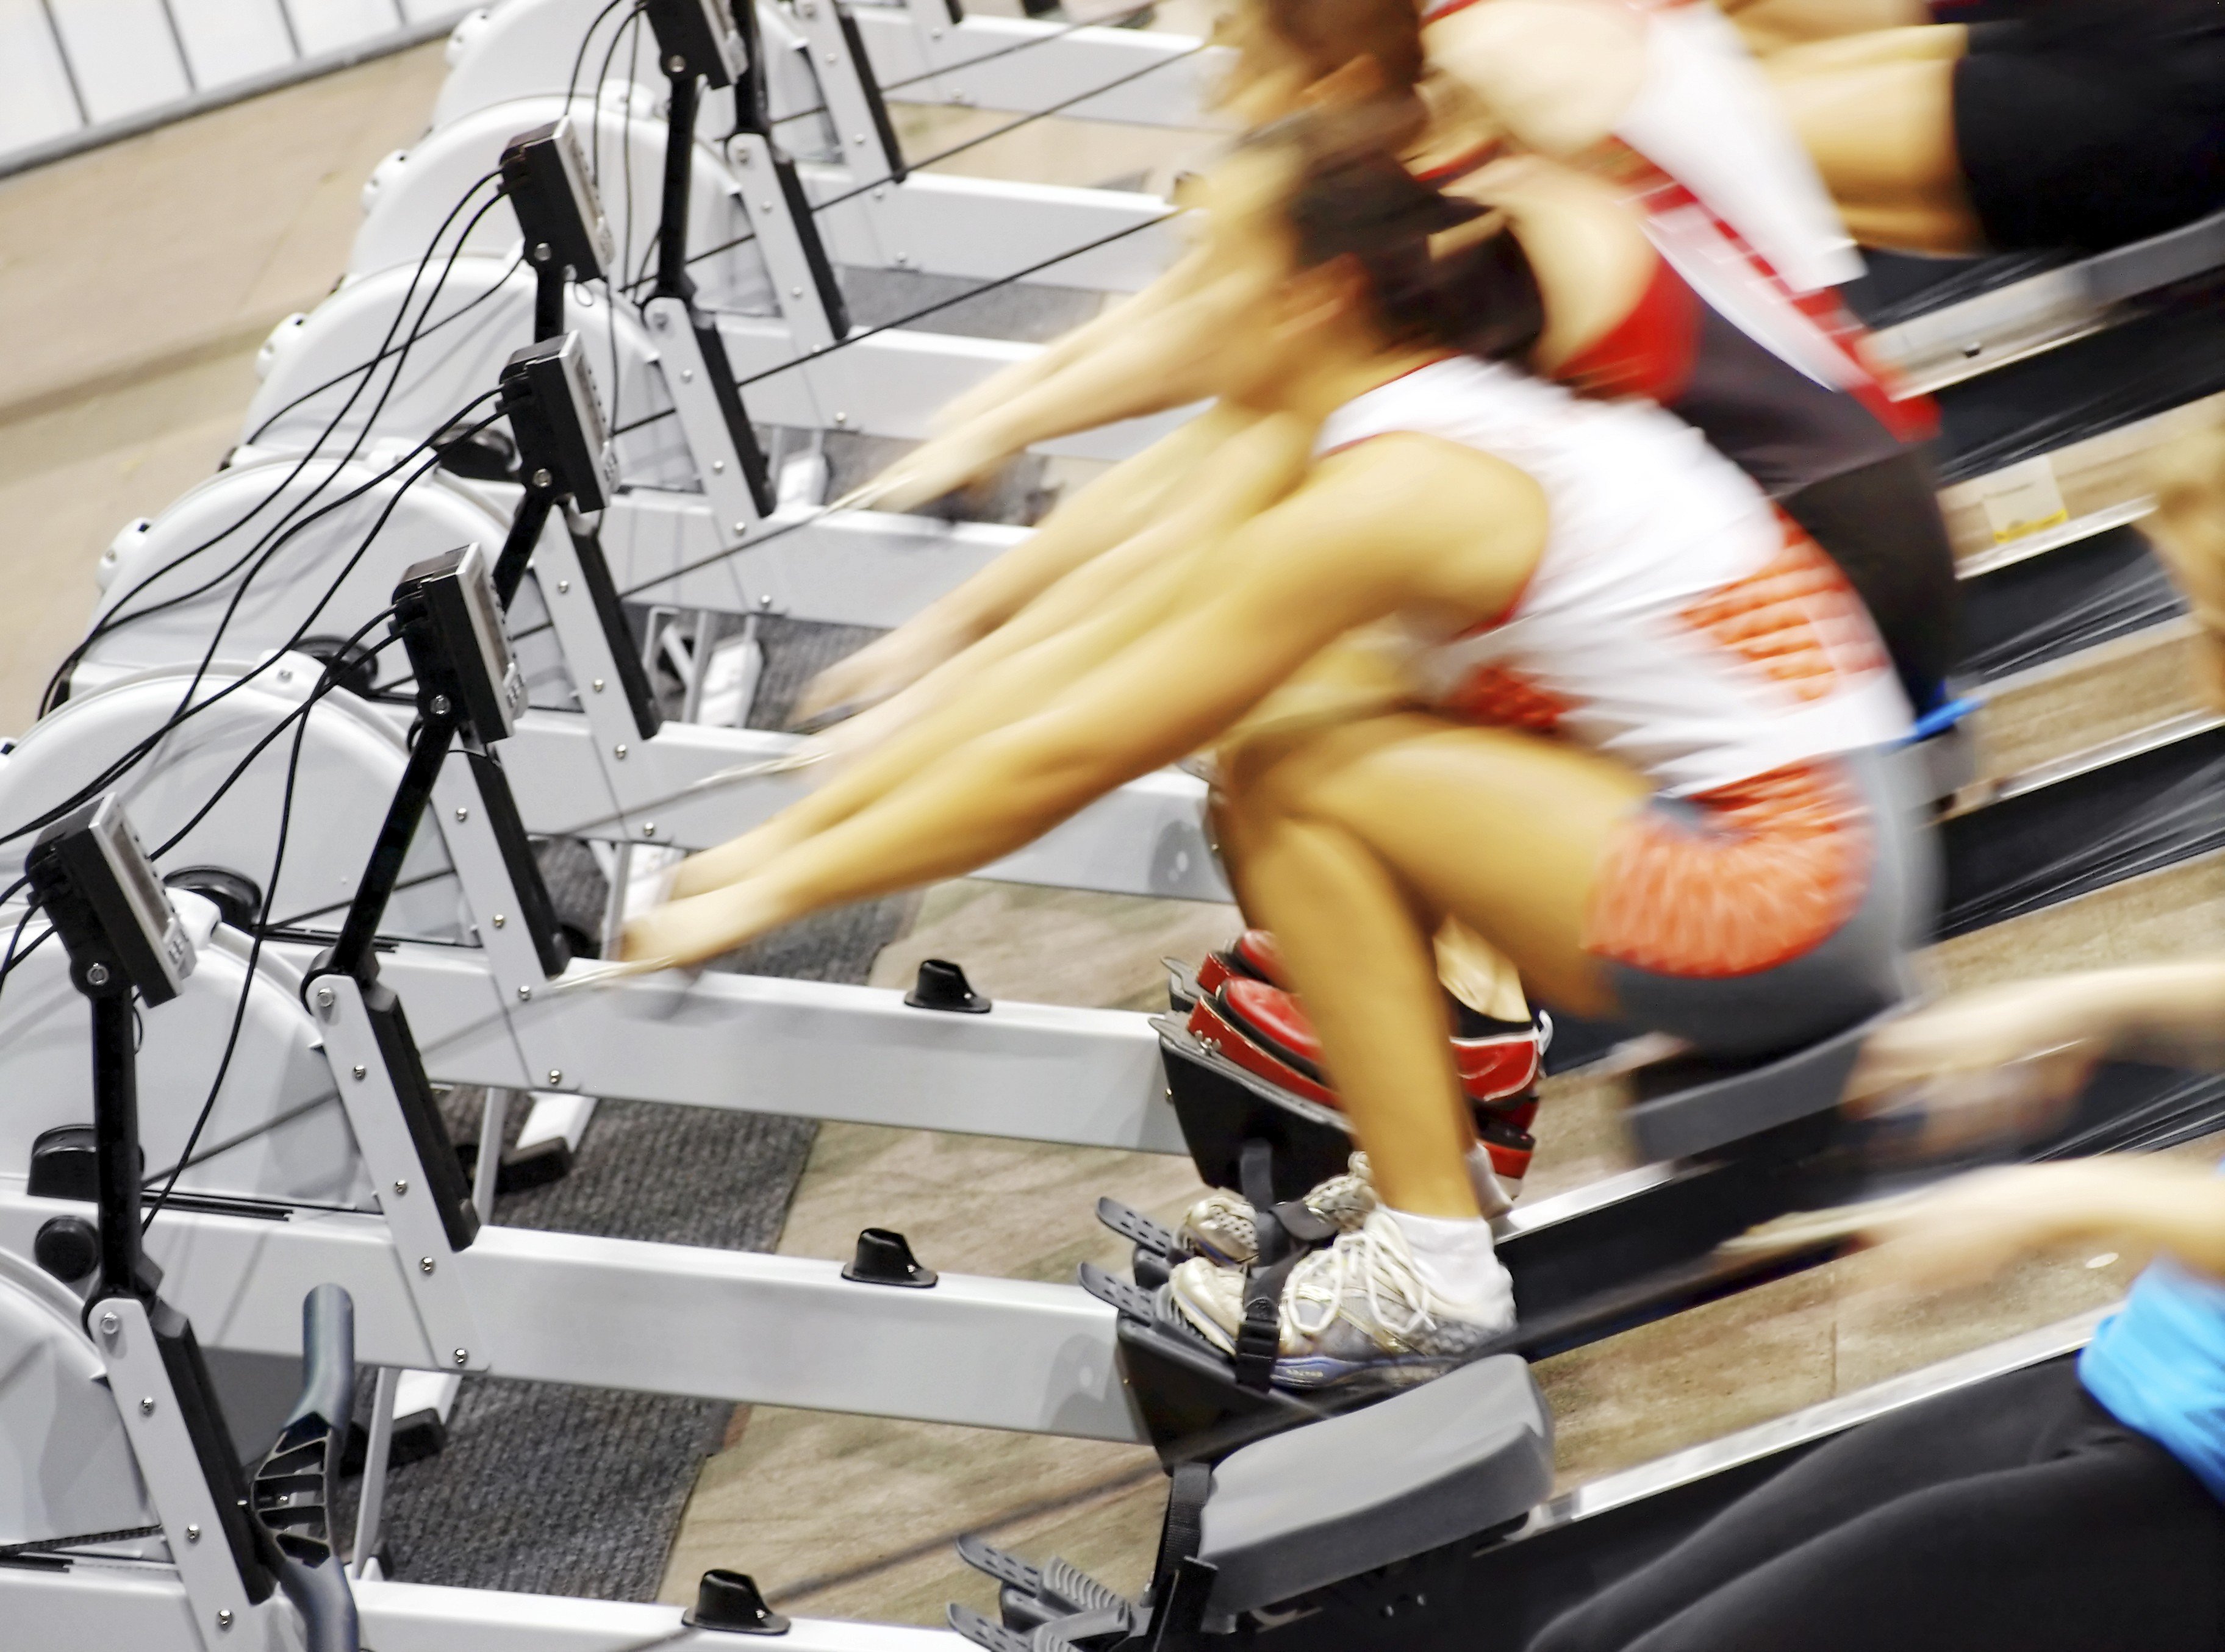 Consumer Council chairman Wong Yuk-shan said fitness centres had been plagued by unfair trade practices. Photo: Shutterstock